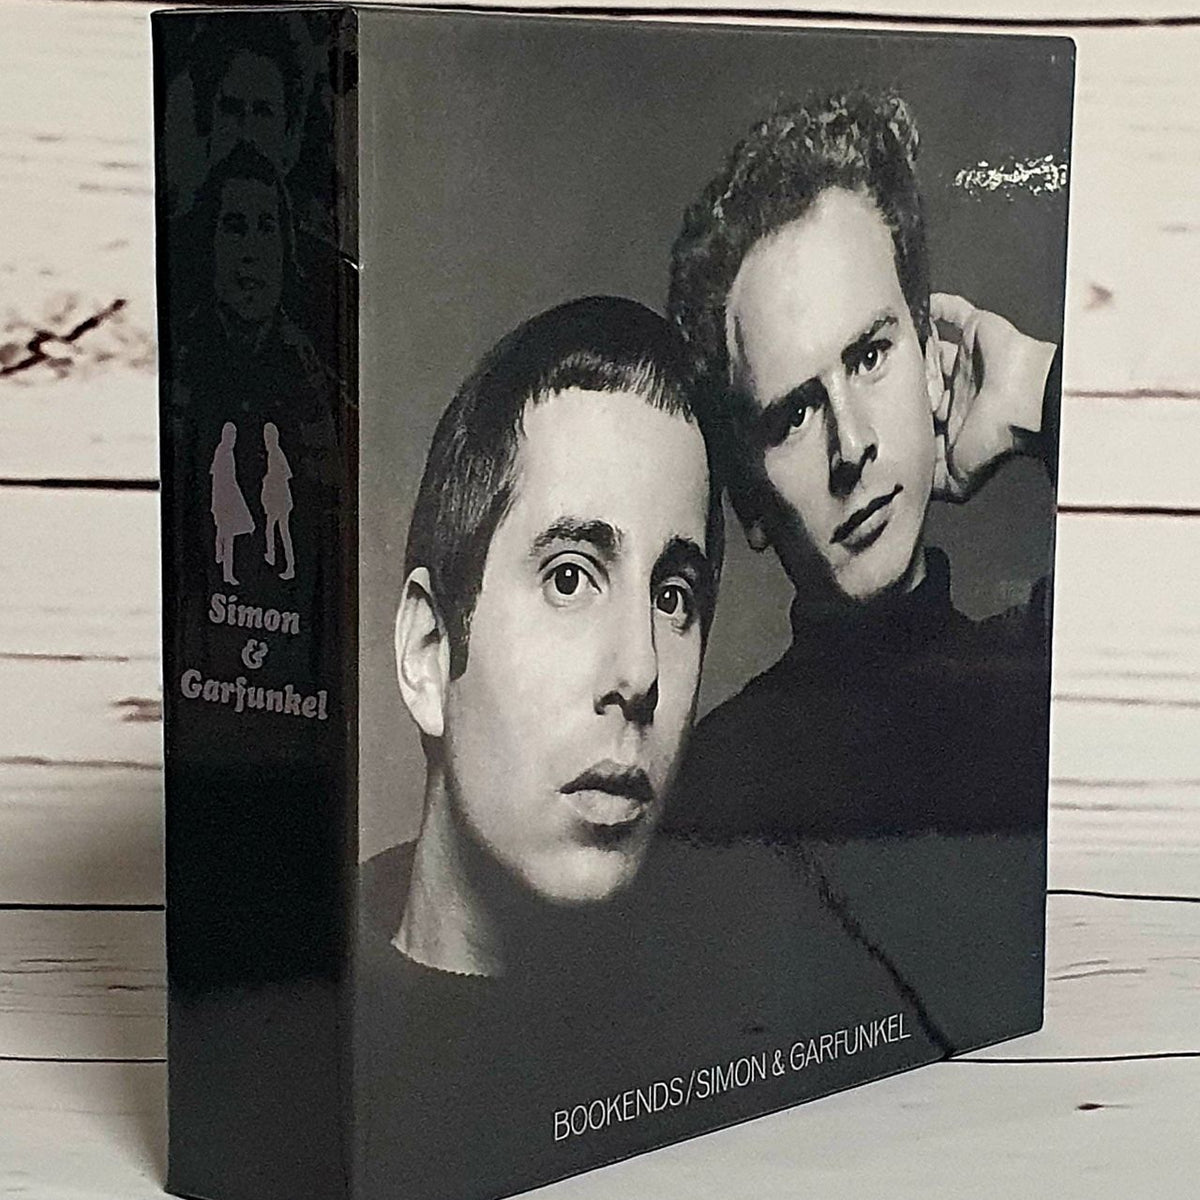 Simon & Garfunkel Bookends - Paper Sleeve Collection Japanese 